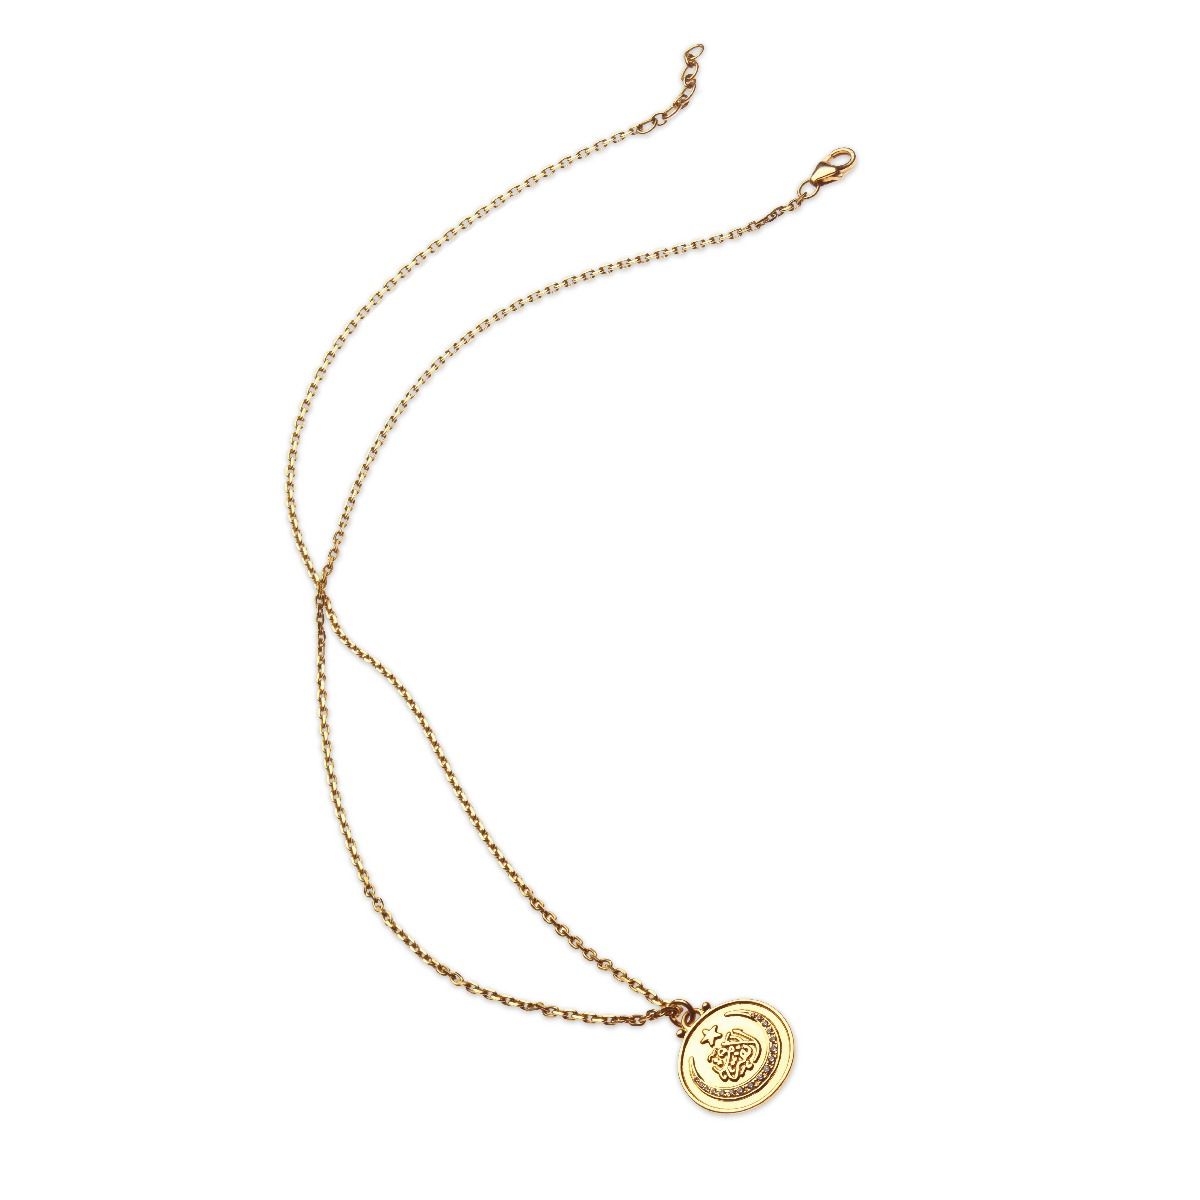 Never Apart Necklace by Azza Fahmy - Designer Necklaces